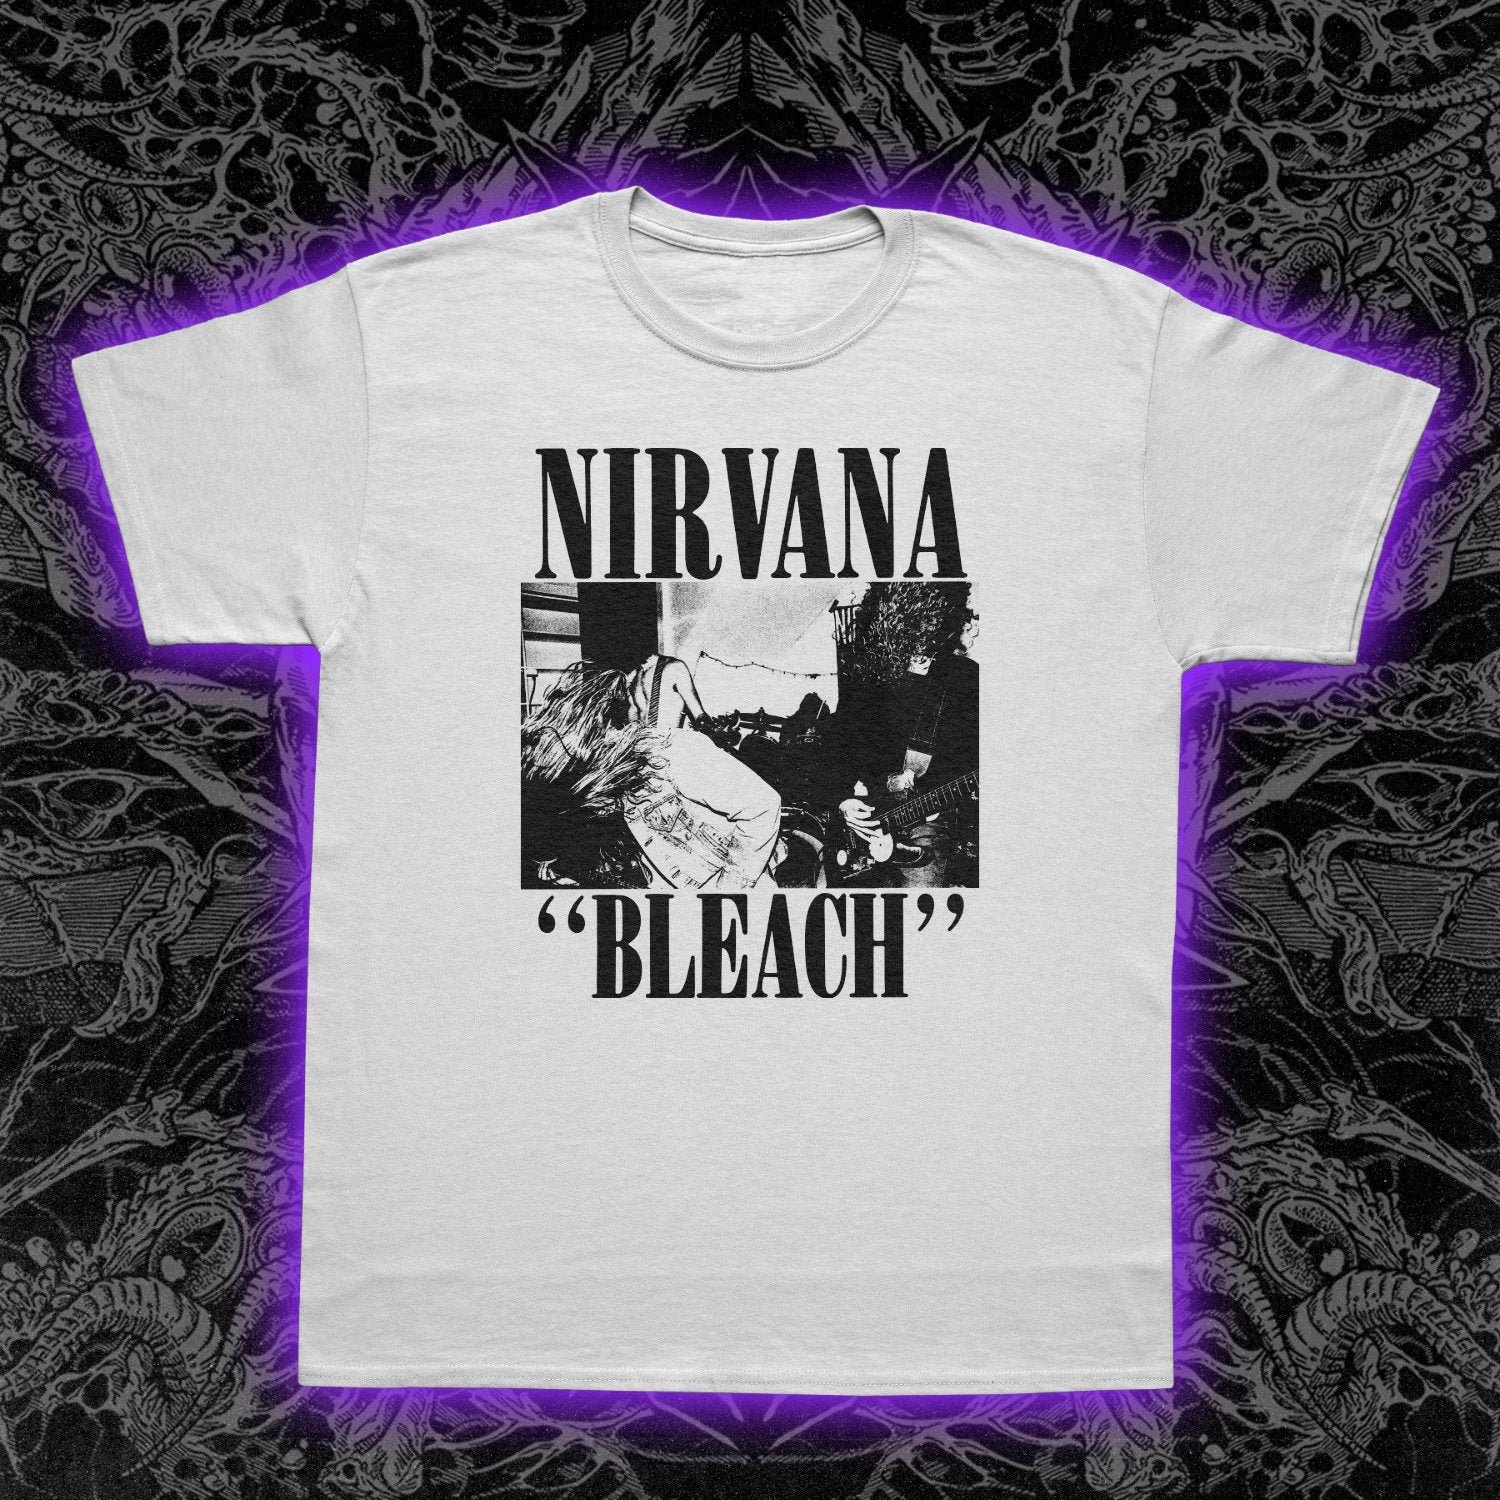 Nirvana Bleach, Occult & Obscure Clothing, Night Channels